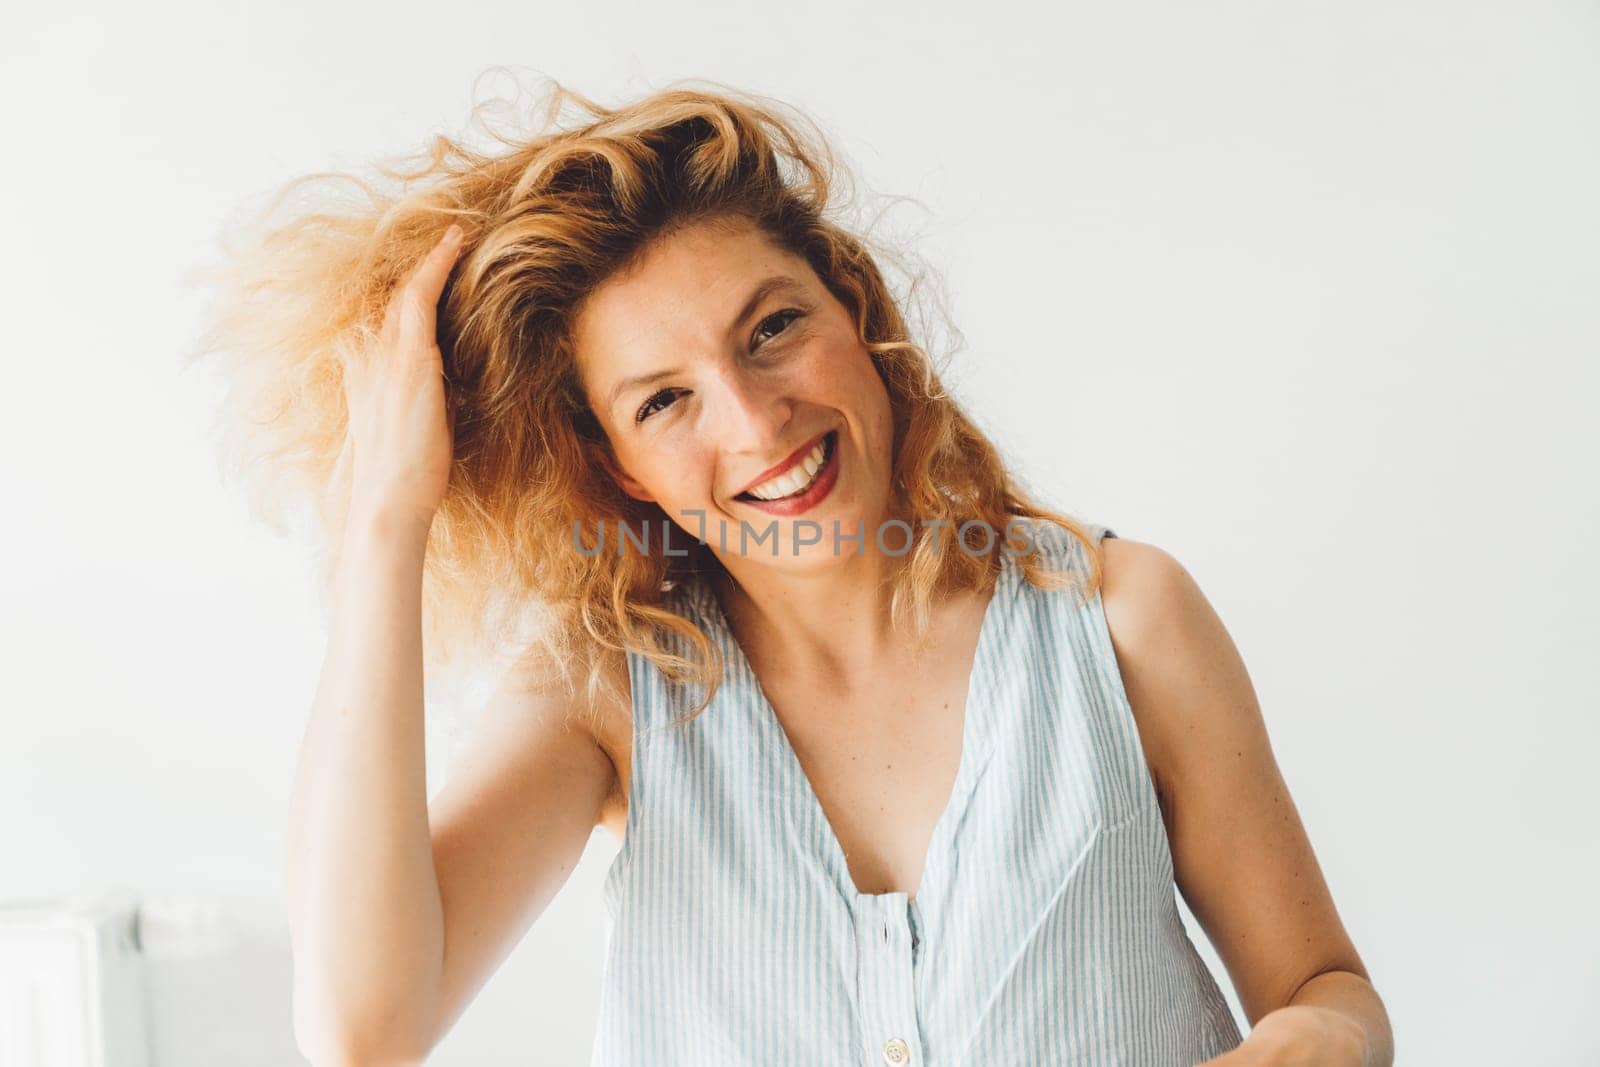 Waist up portrait smiling cheerful woman with curly hair and red lipstick looking at the camera, white wall background by VisualProductions